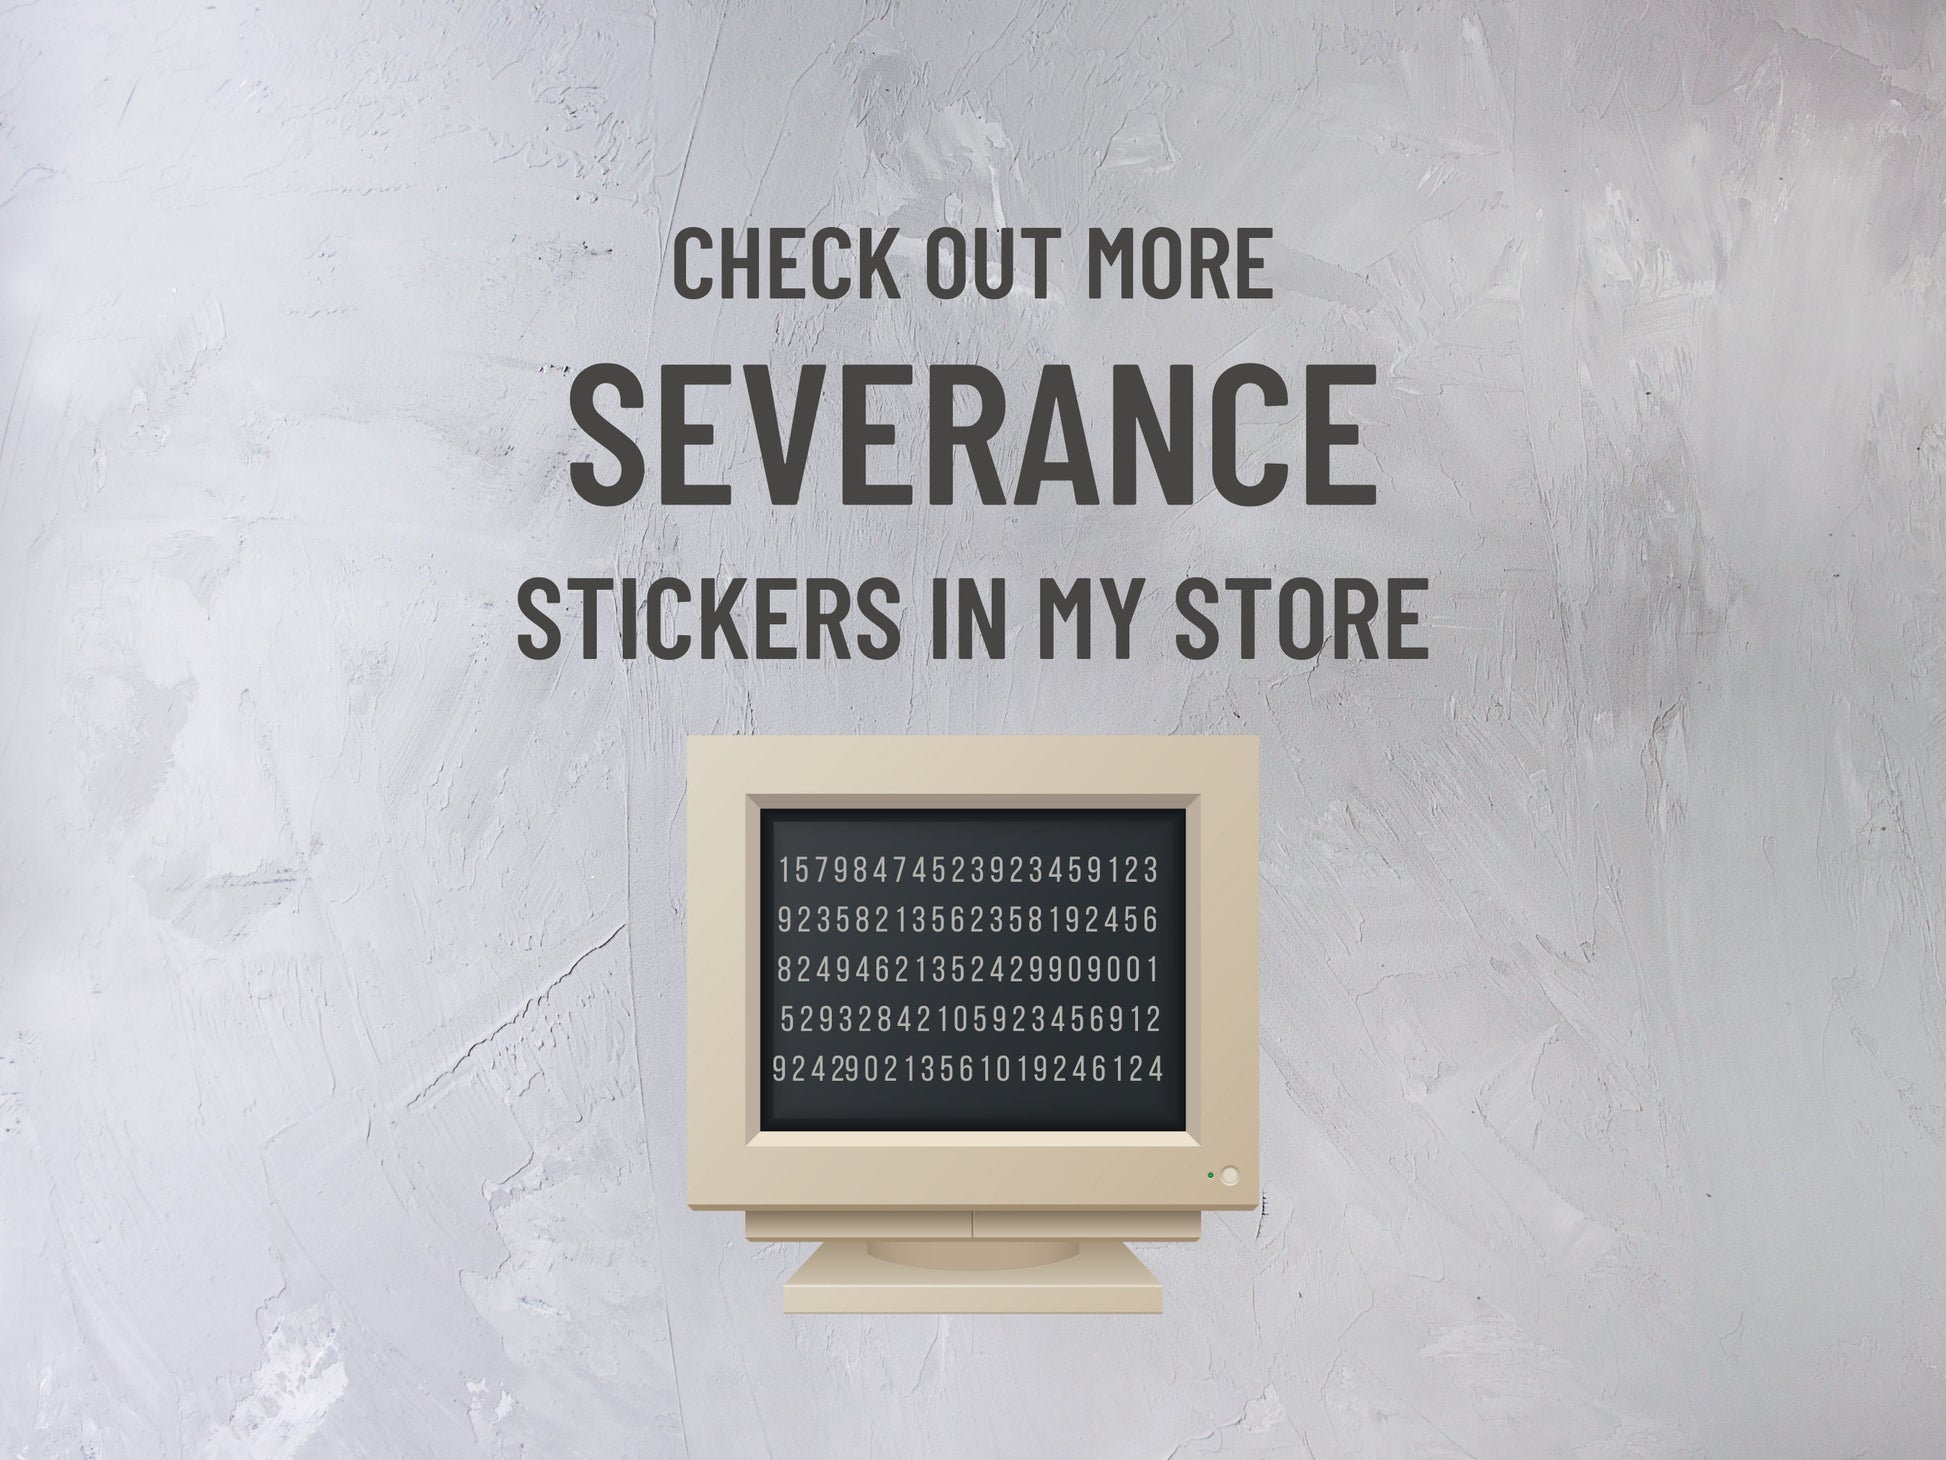 Random stickers! Check out our shop! : r/stickerstore